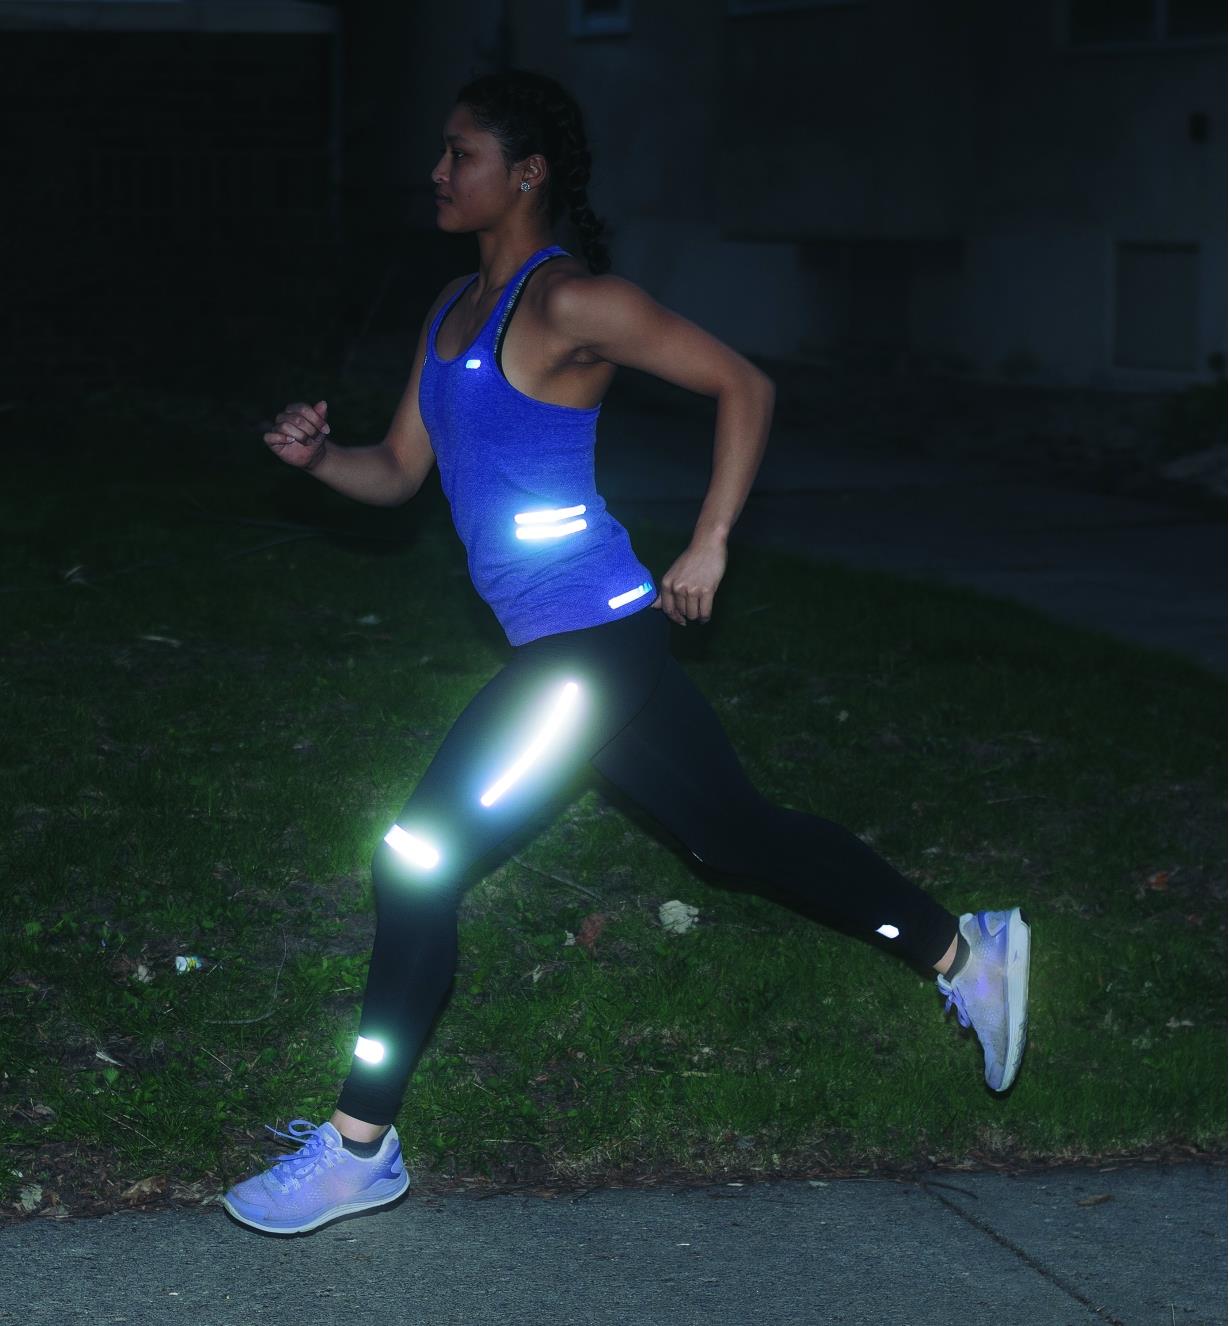 A woman running at night with Iron-On & Peel-and-Stick Reflective Strips applied to her clothing